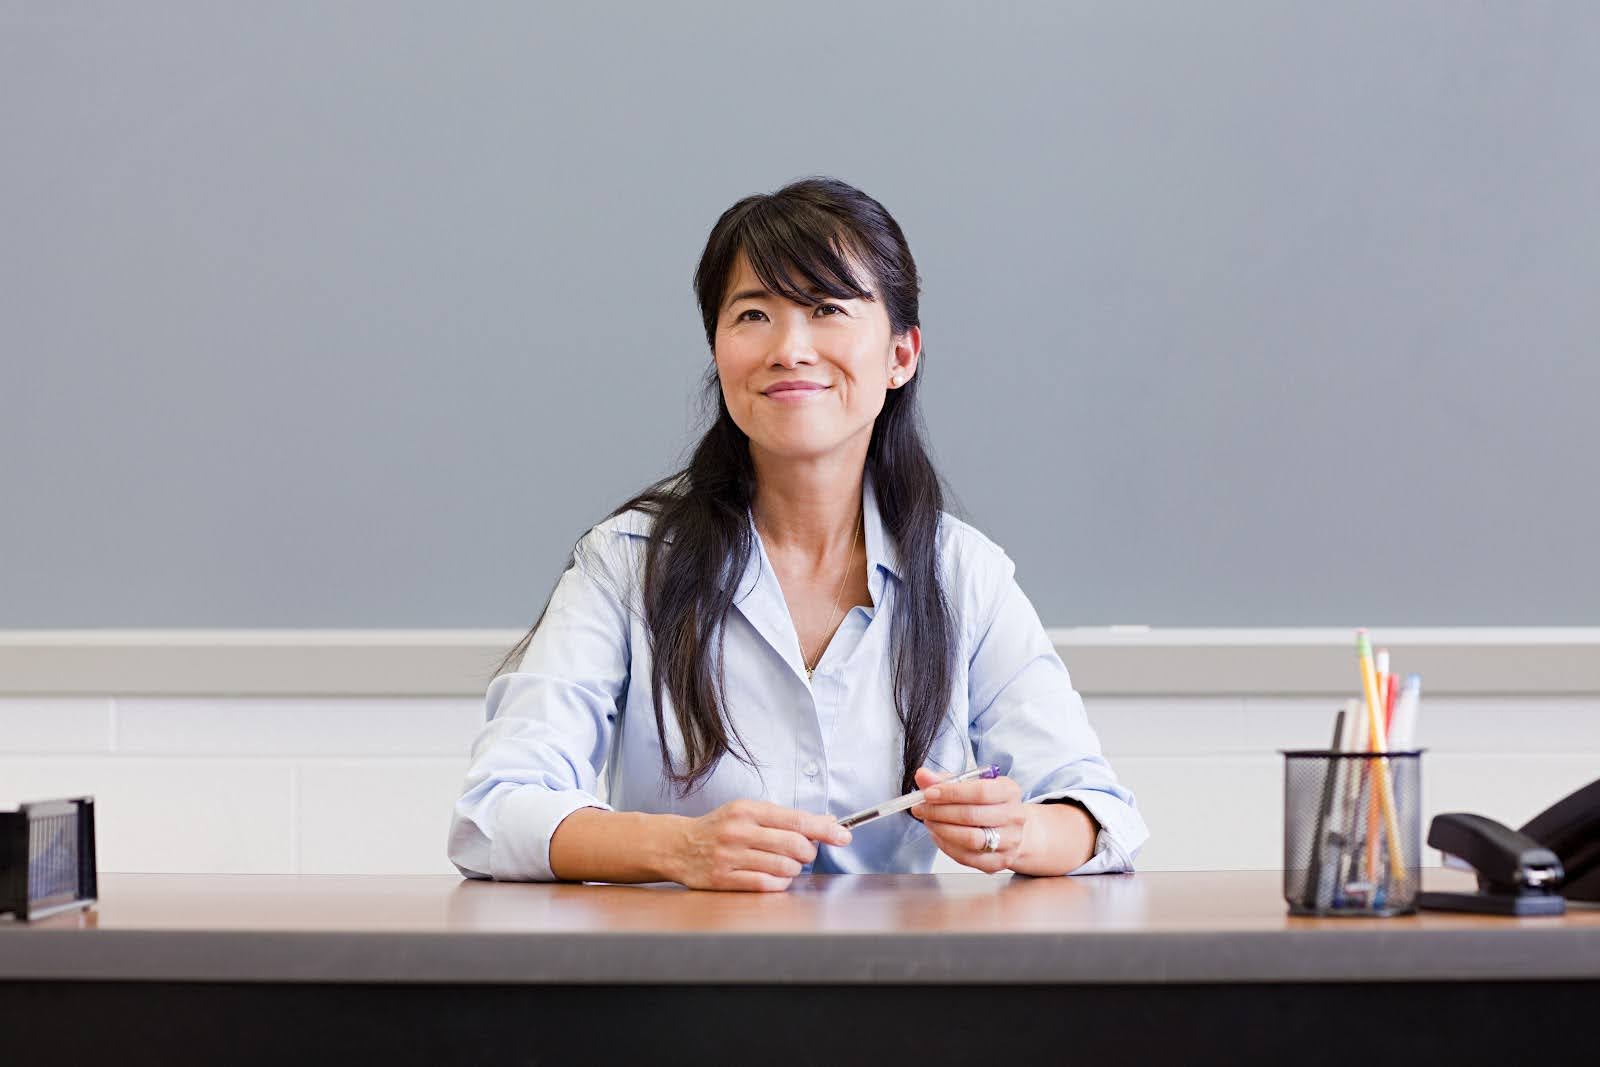 A smiling teacher holding a pen sits at her desk; in the foreground we see a stapler, a document organizer, and a container of pens and pencils.